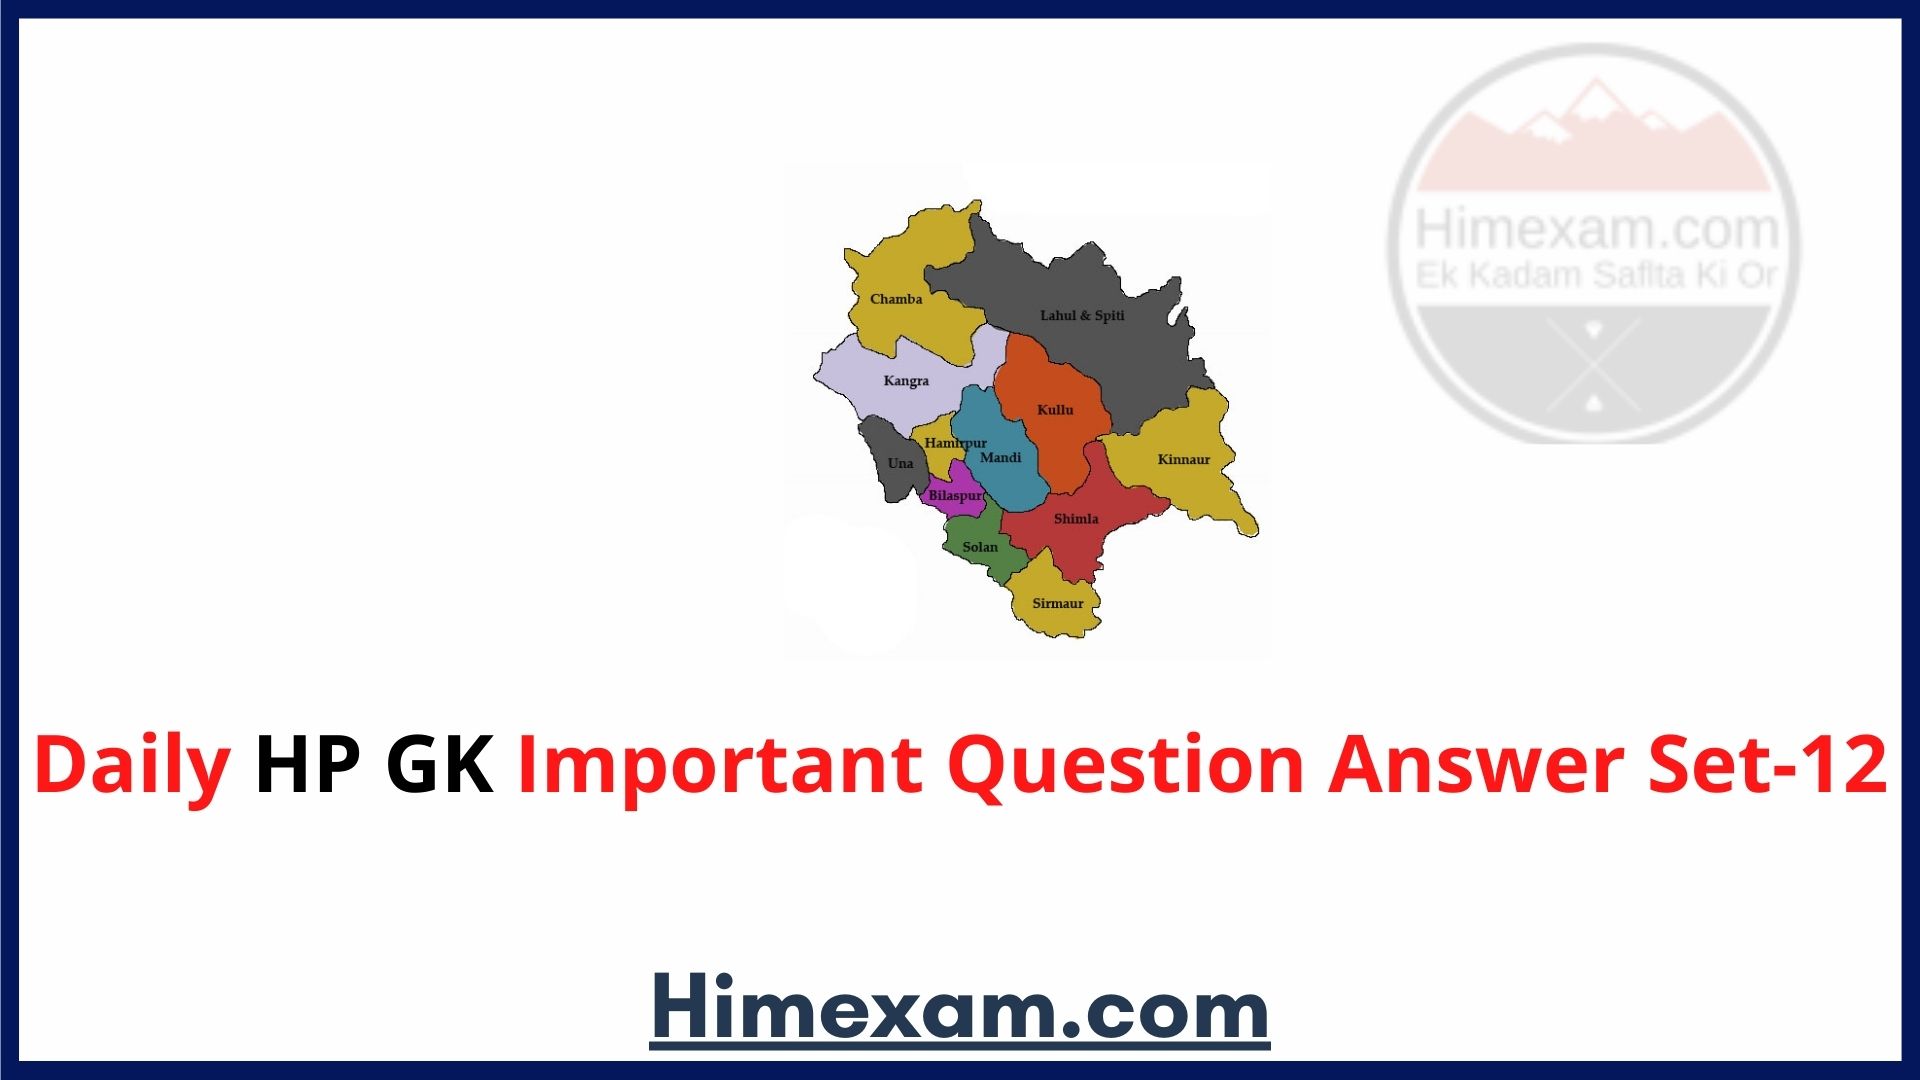 Daily HP GK Important Question Answer Set-12